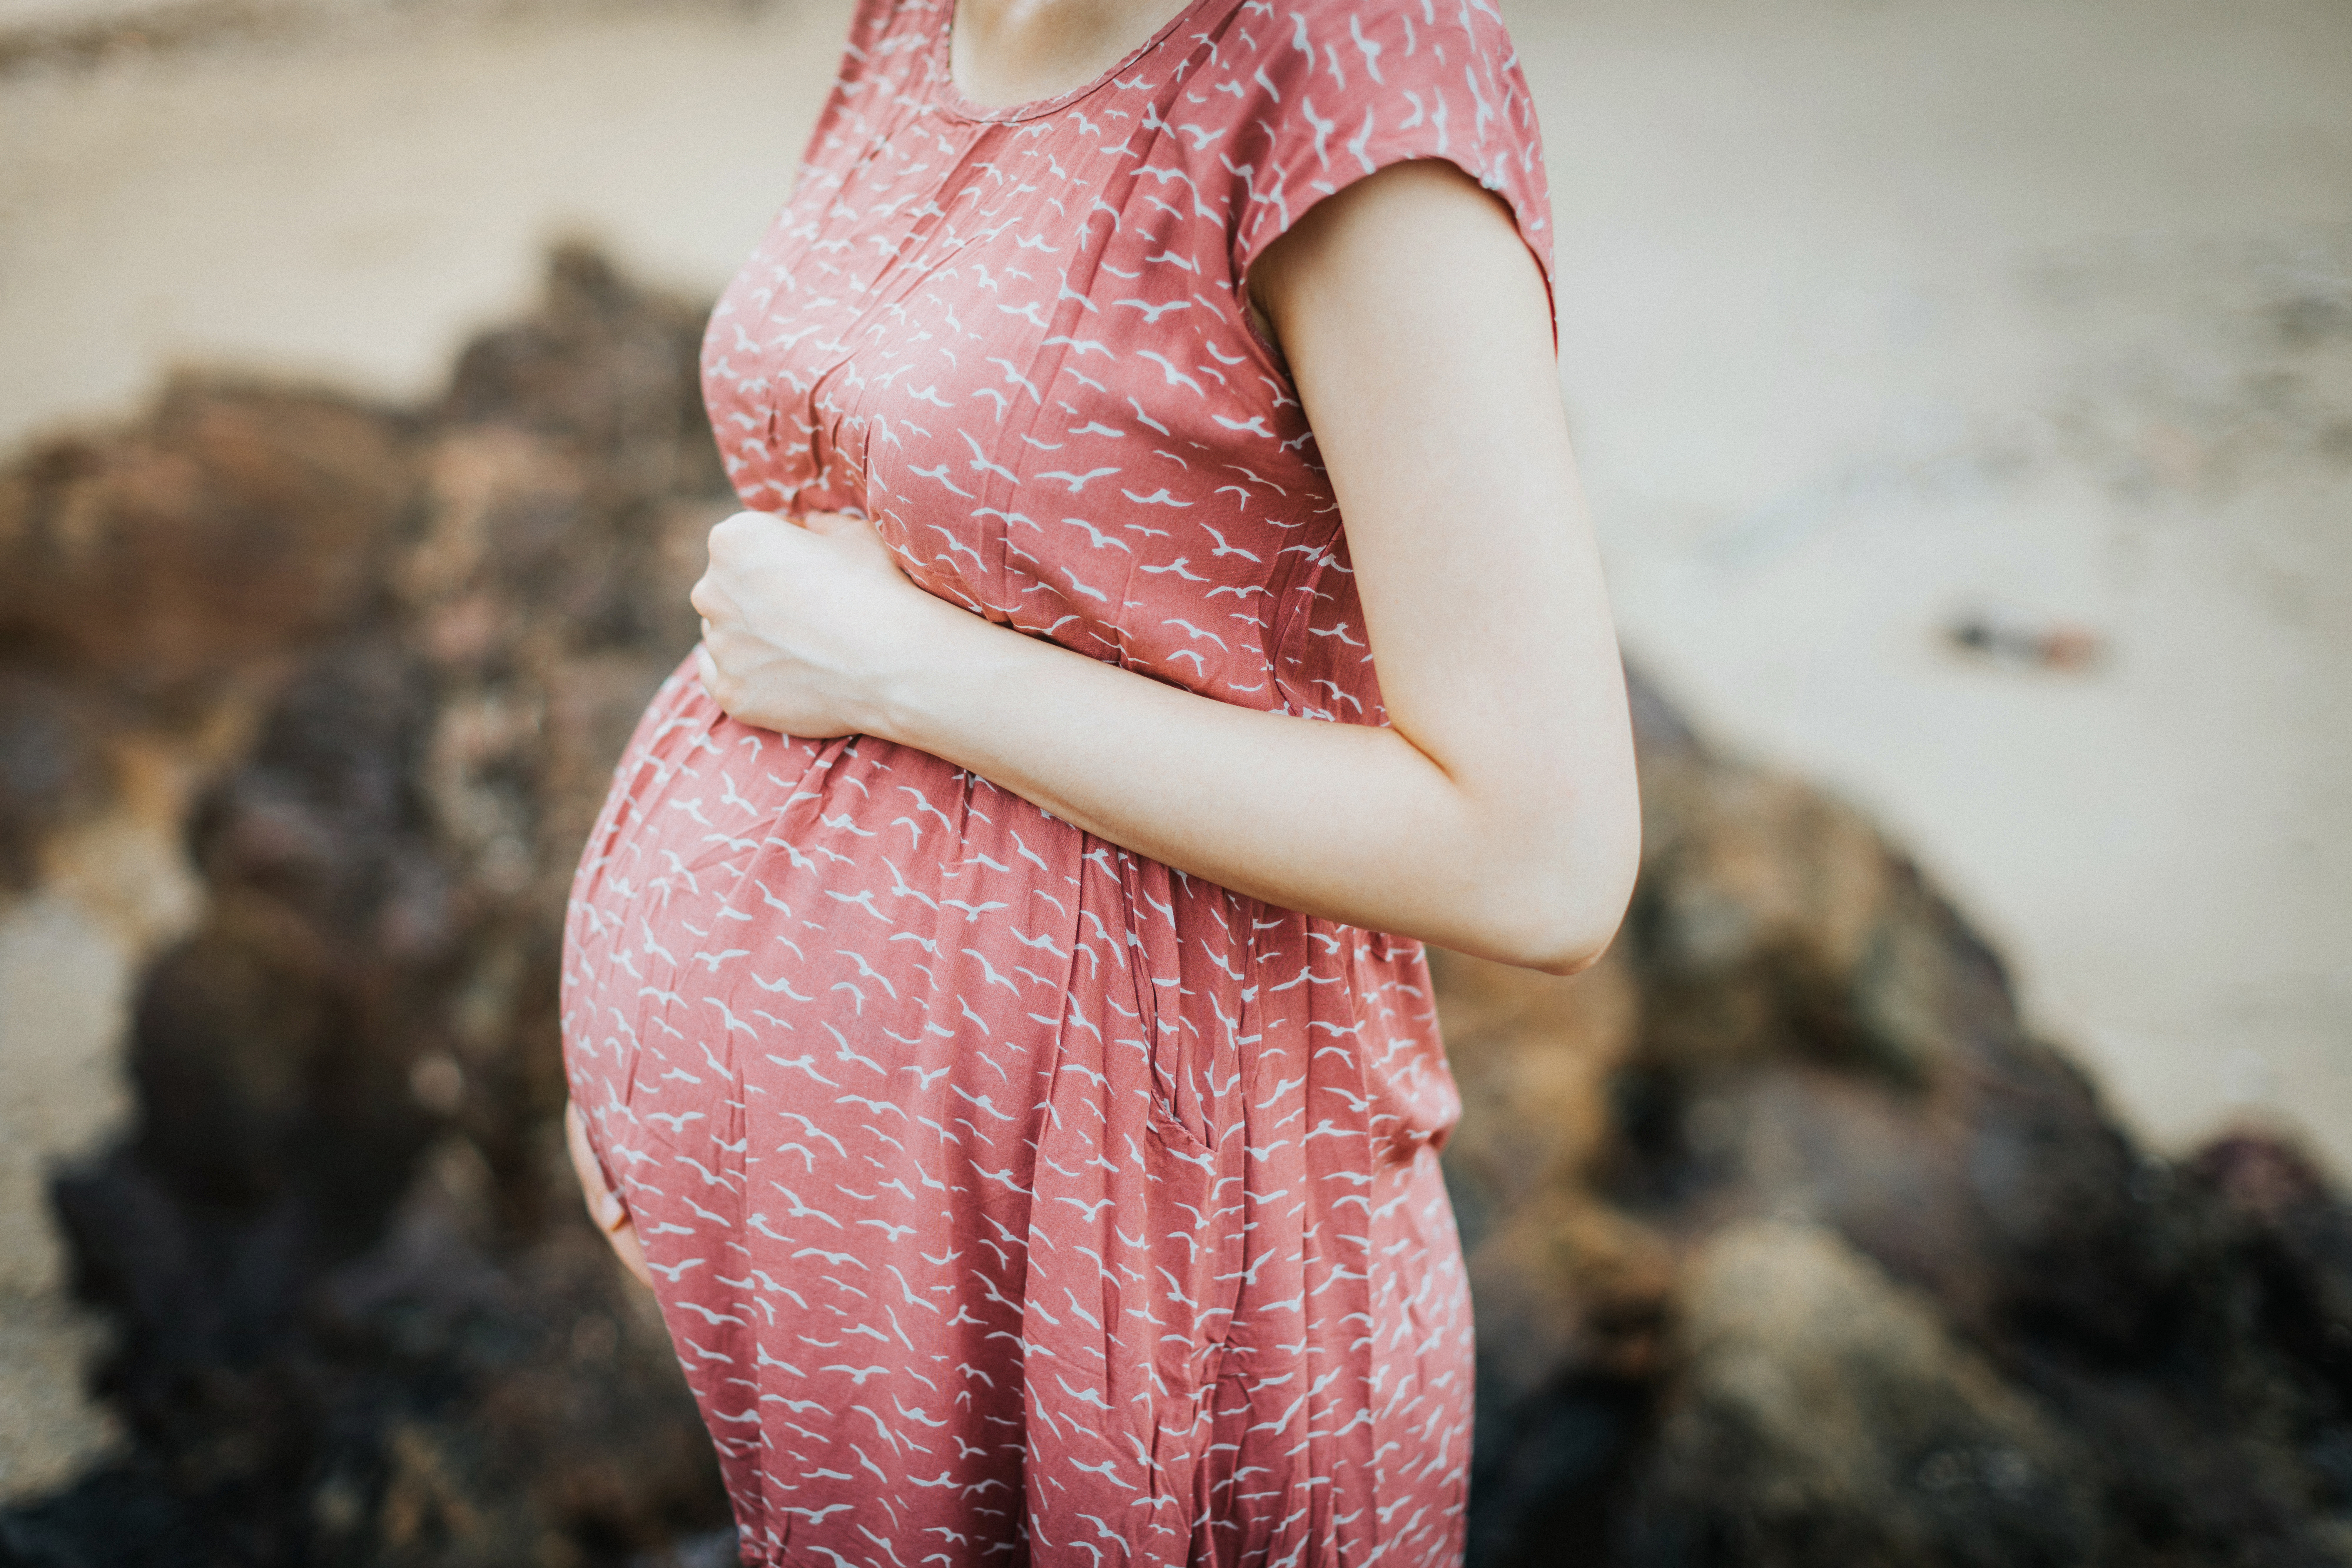 A pregnant woman holding her belly | Source: Getty Images